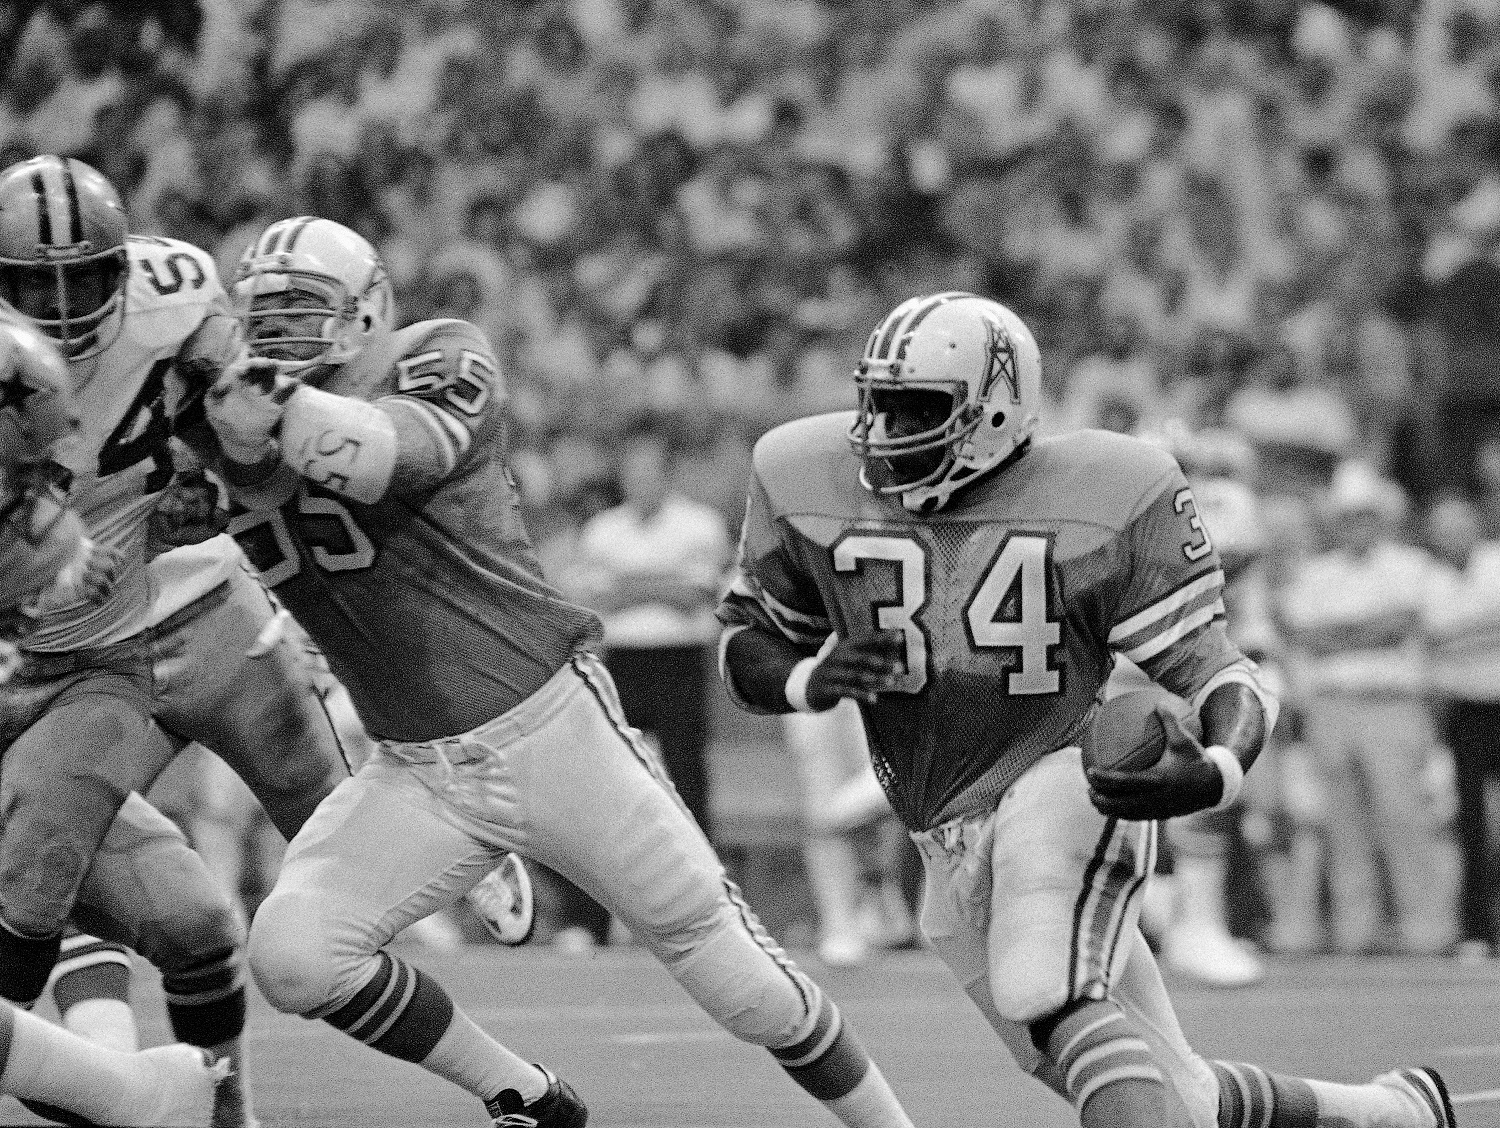 Houston Oilers star running back Earl Campbell (34) shown in action during Saturday night, Aug. 24, 1980 exhibition game against the Dallas Cowboys at Texas Stadium.  (AP Photo/Bill Haber)